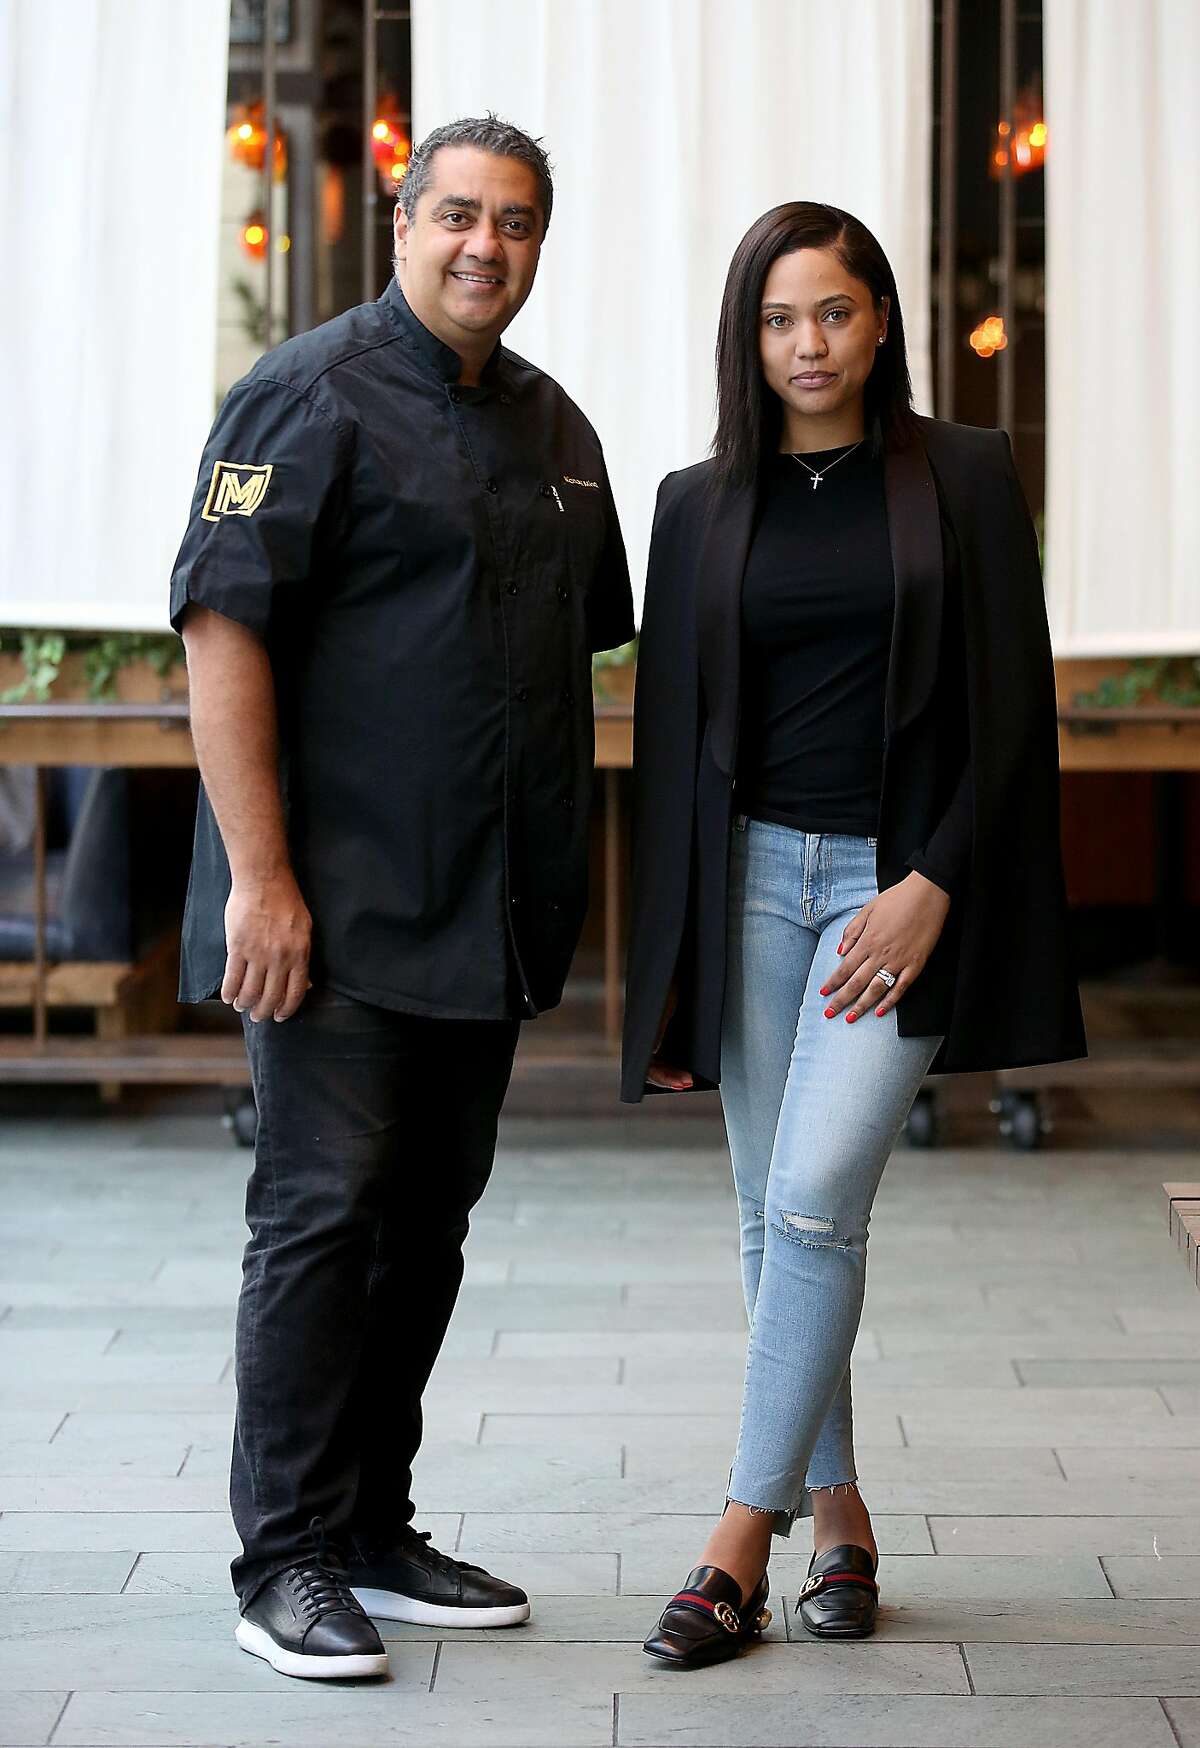 Ayesha Curry and Michael Mina and Ayesha Curry partner on new restaurant called International Smoke which will replace RN74 seen on Thursday, May 4, 2017, in San Francisco, Calif.